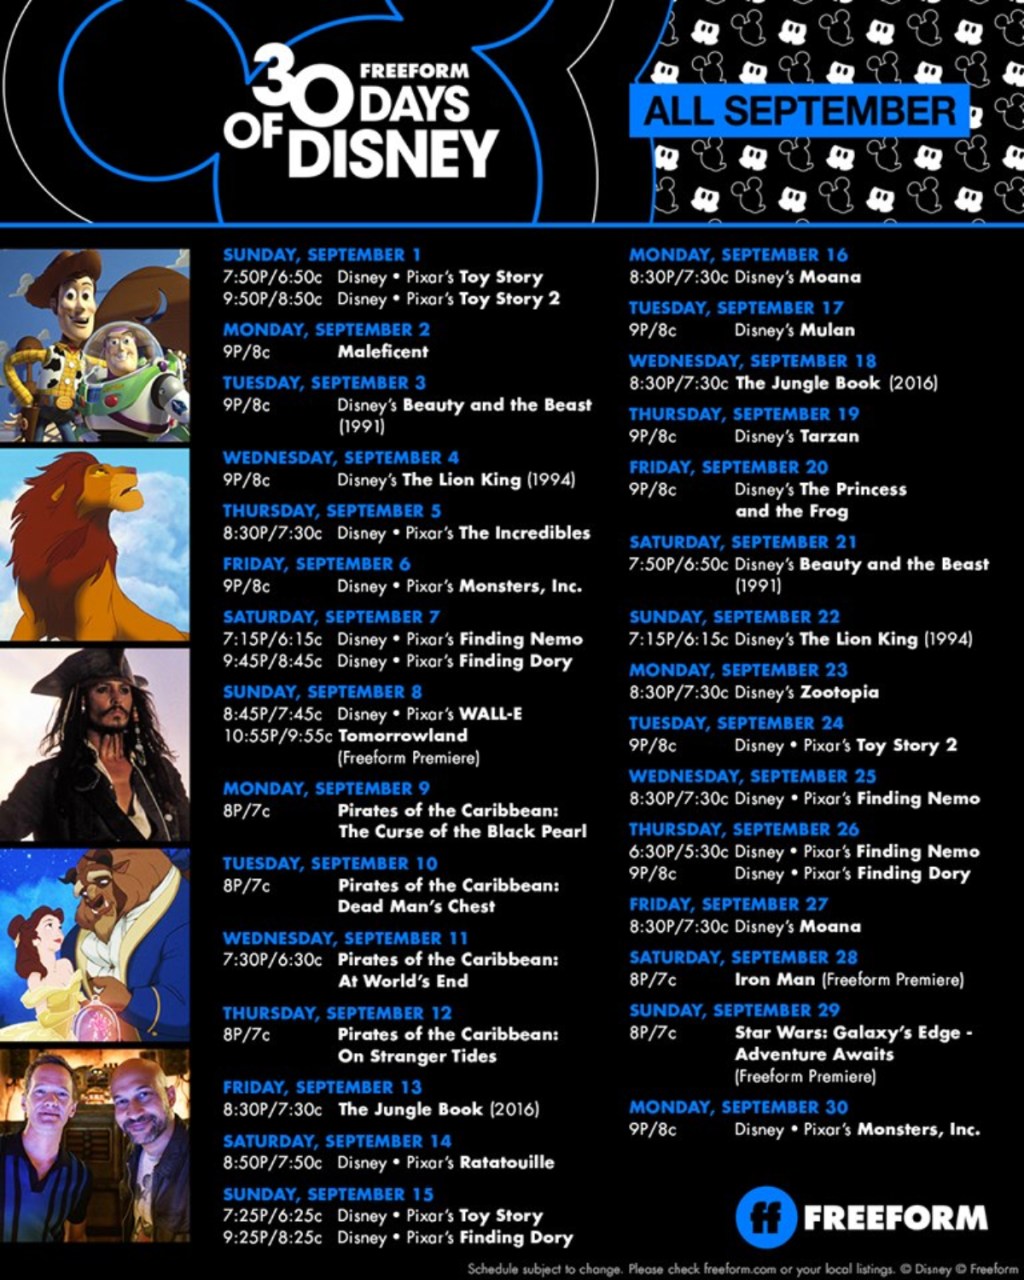 30 Days of Disney is Coming to Freeform this September!